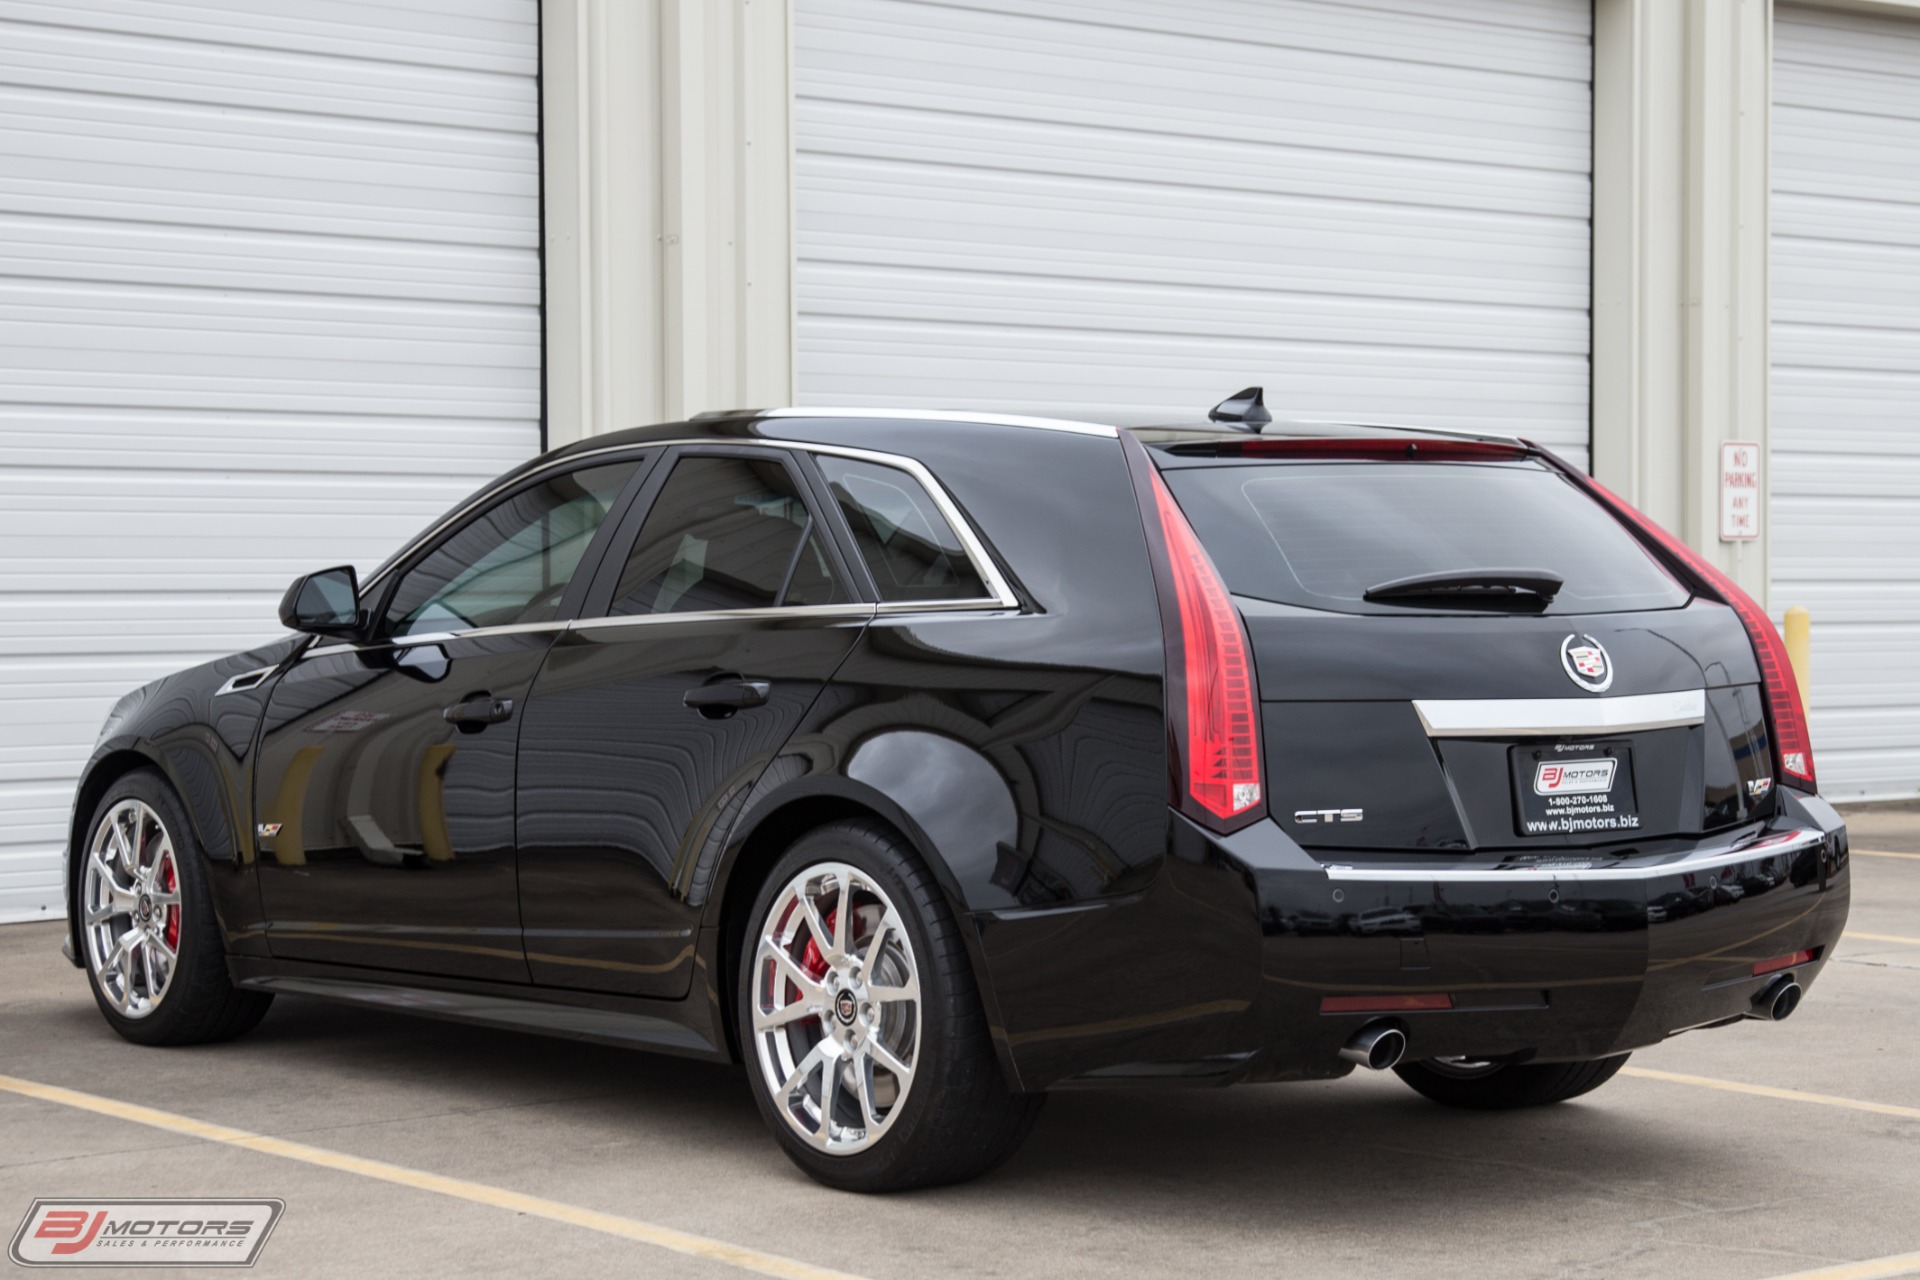 Used-2014-Cadillac-CTS-V-Wagon-HPE700-Package